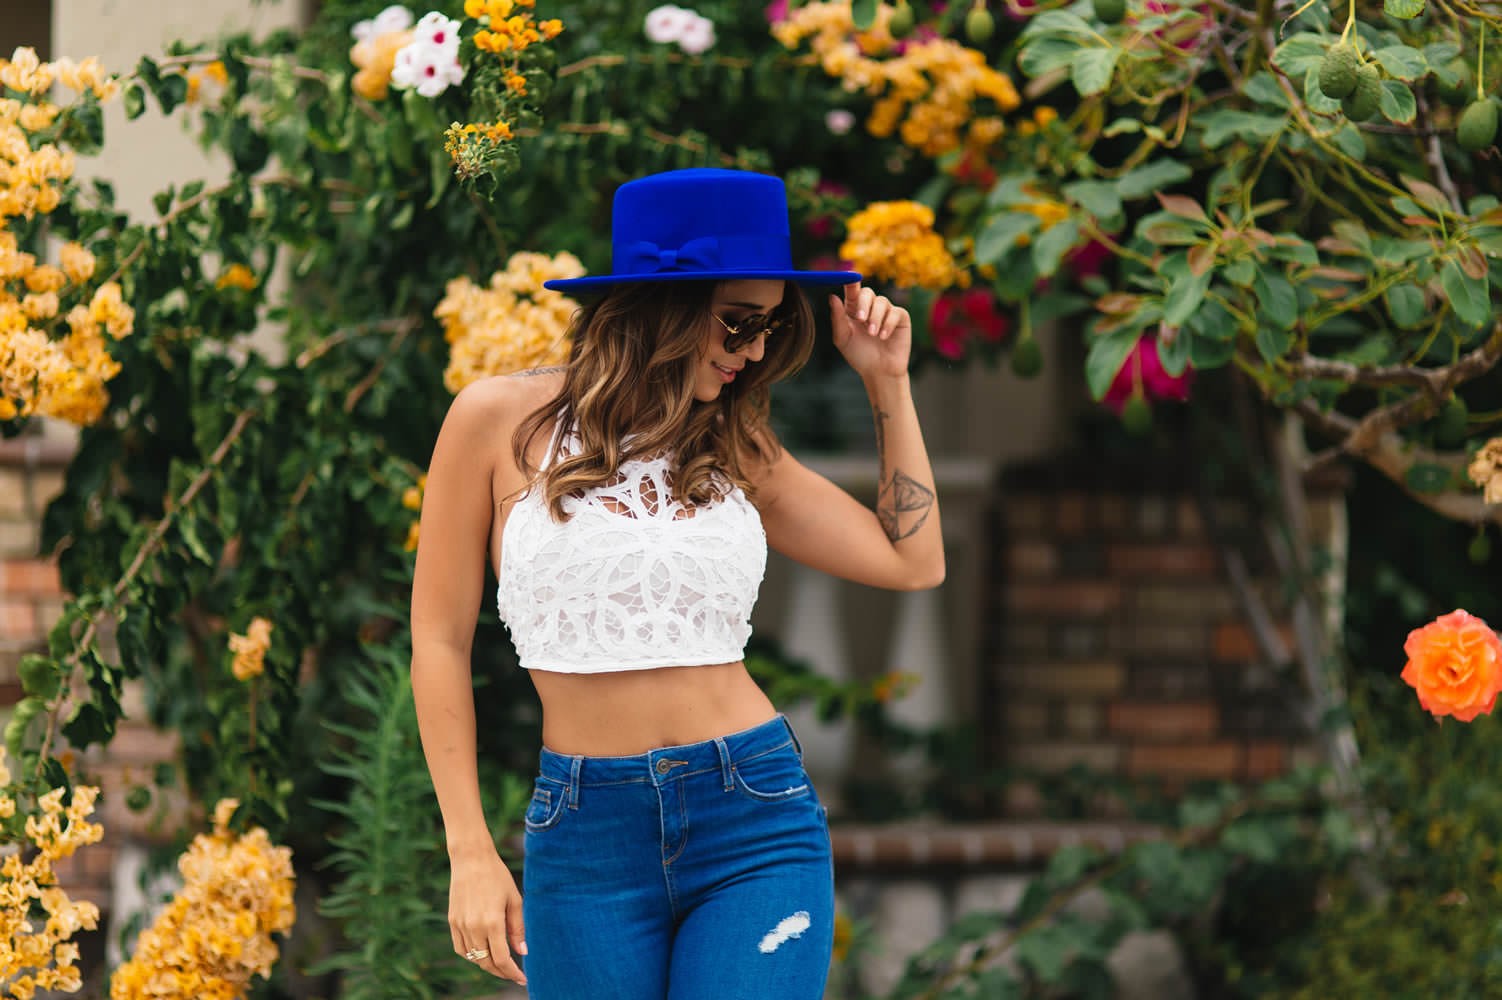 Tianna Gregory Women Model Jeans Pants Women With Glasses Hat Tattoo Smiling Portrait 1502x1000